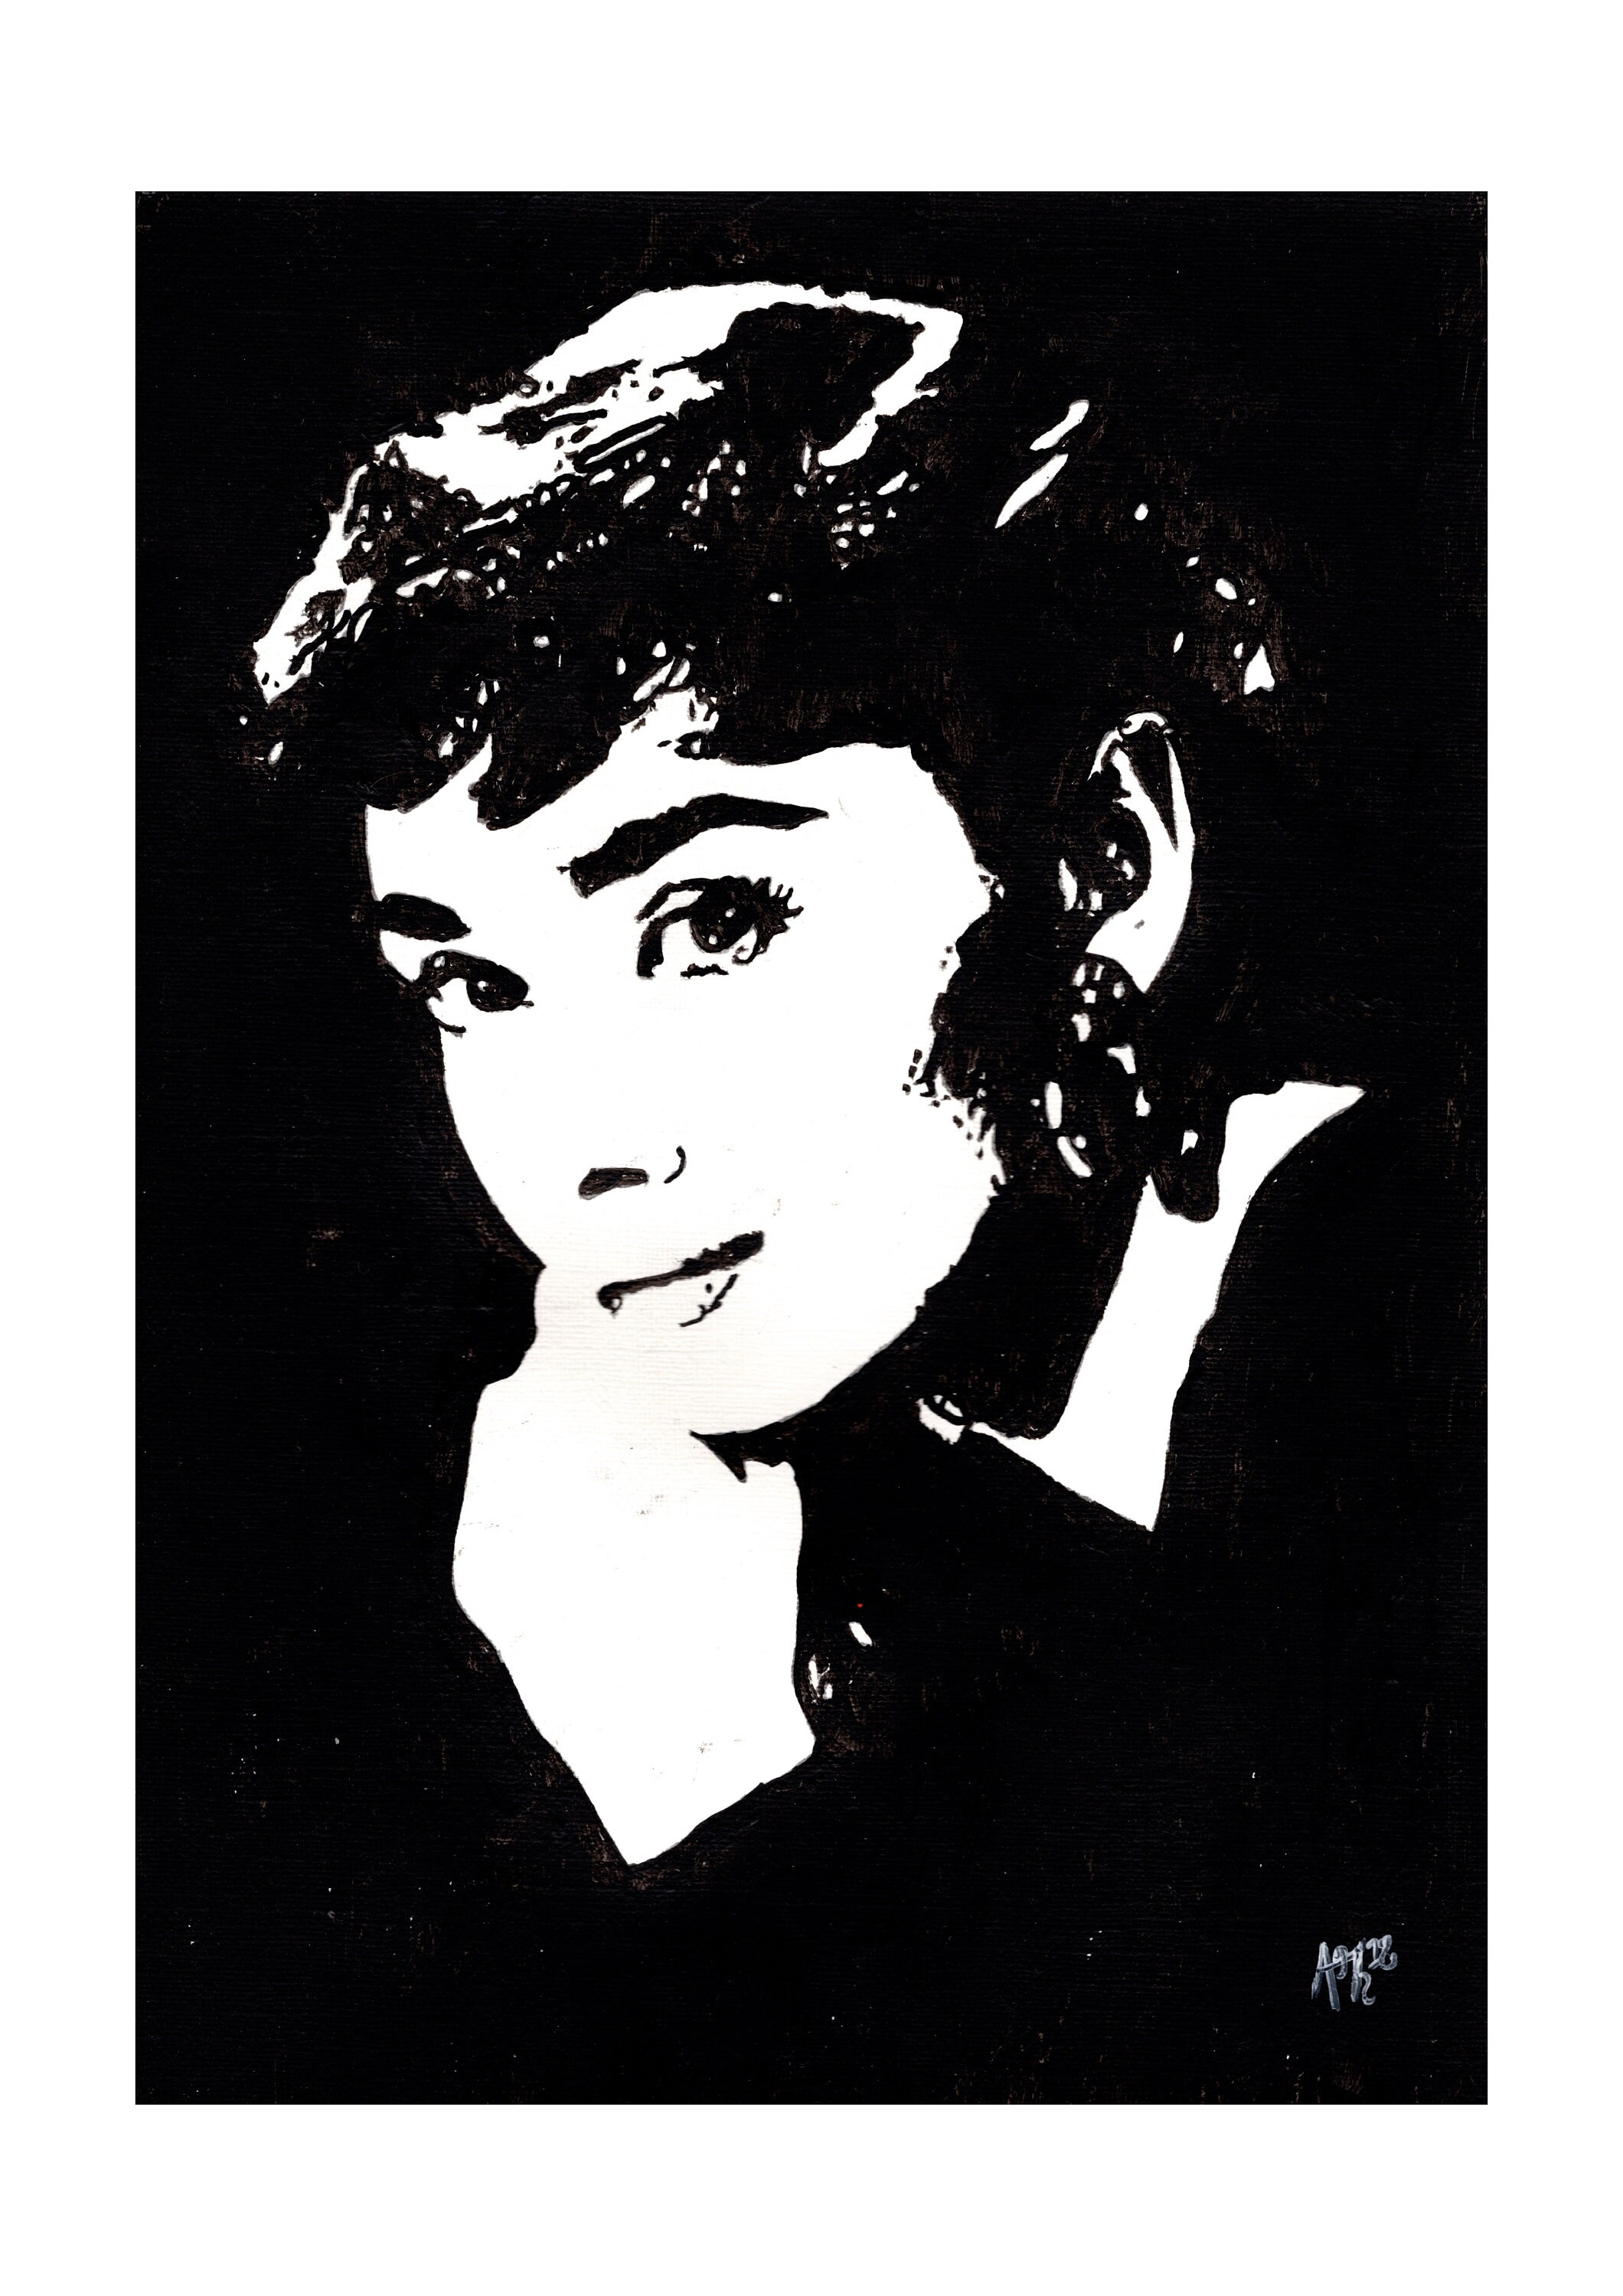 26 Audrey Hepburn British actress Model Poster Hollywood Star Black White Quote